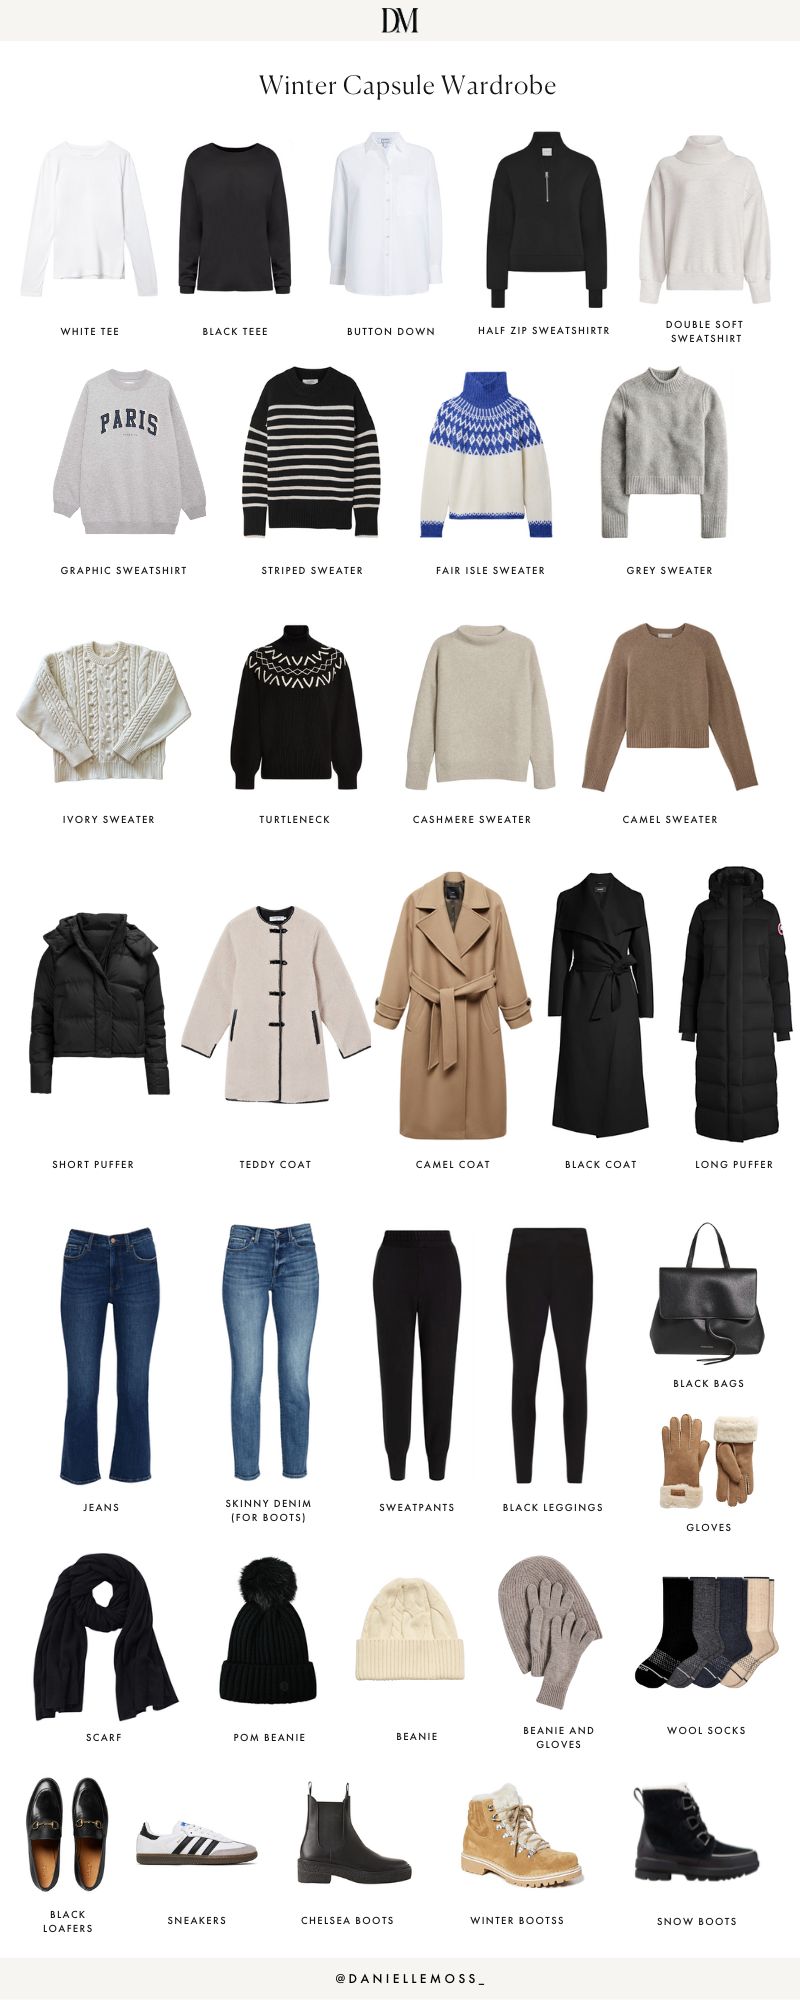 Do you have these winter clothes in your wardrobe?